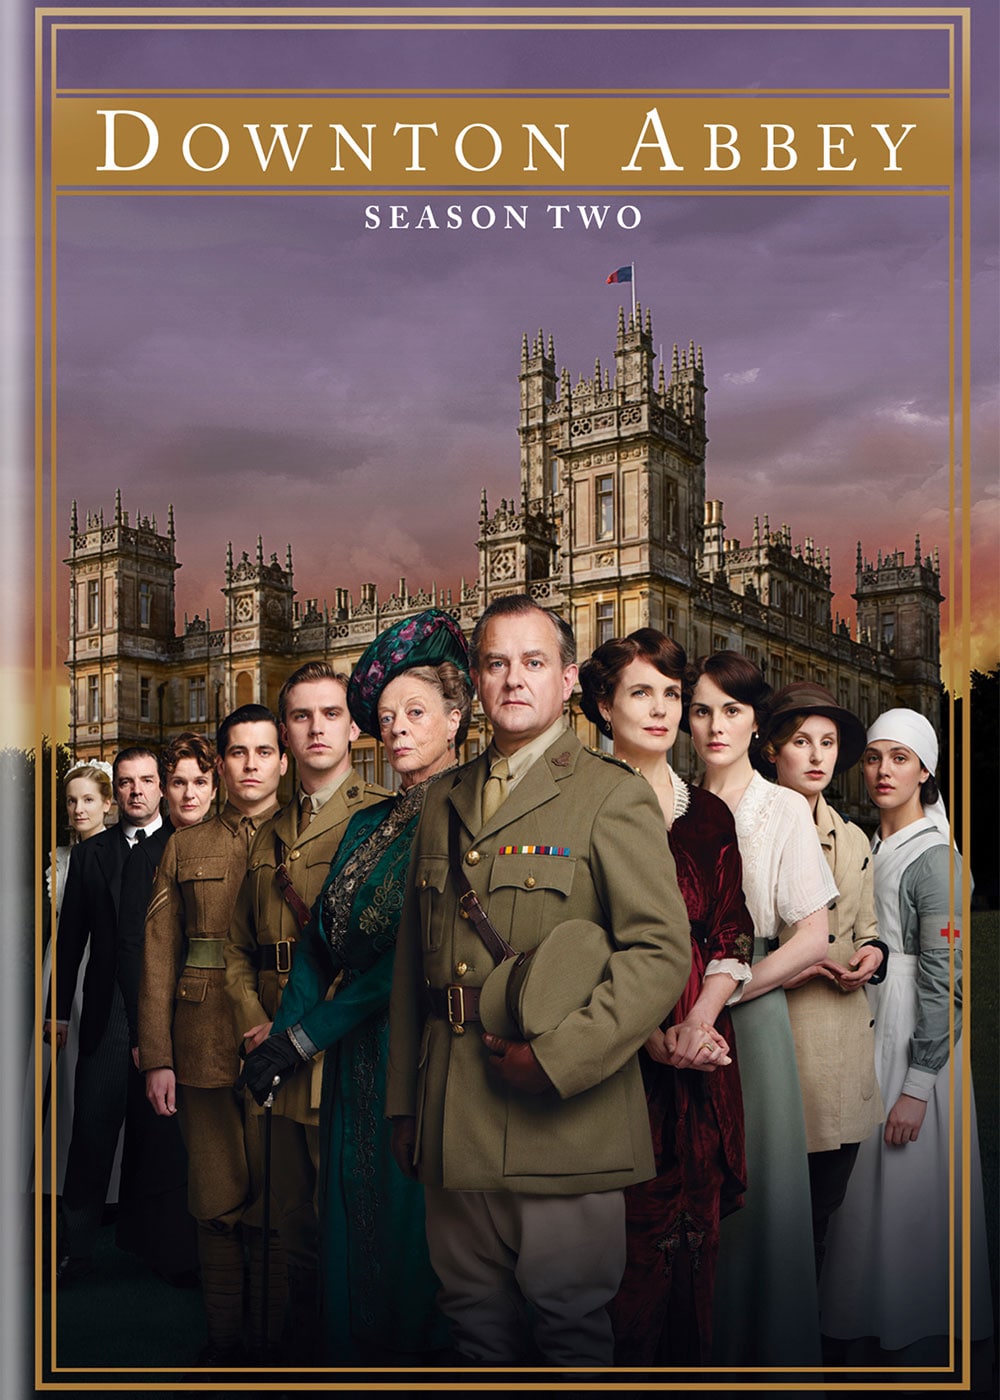 Downton Abbey Season Tv Series Release Date Review Cast Trailer Watch Online At